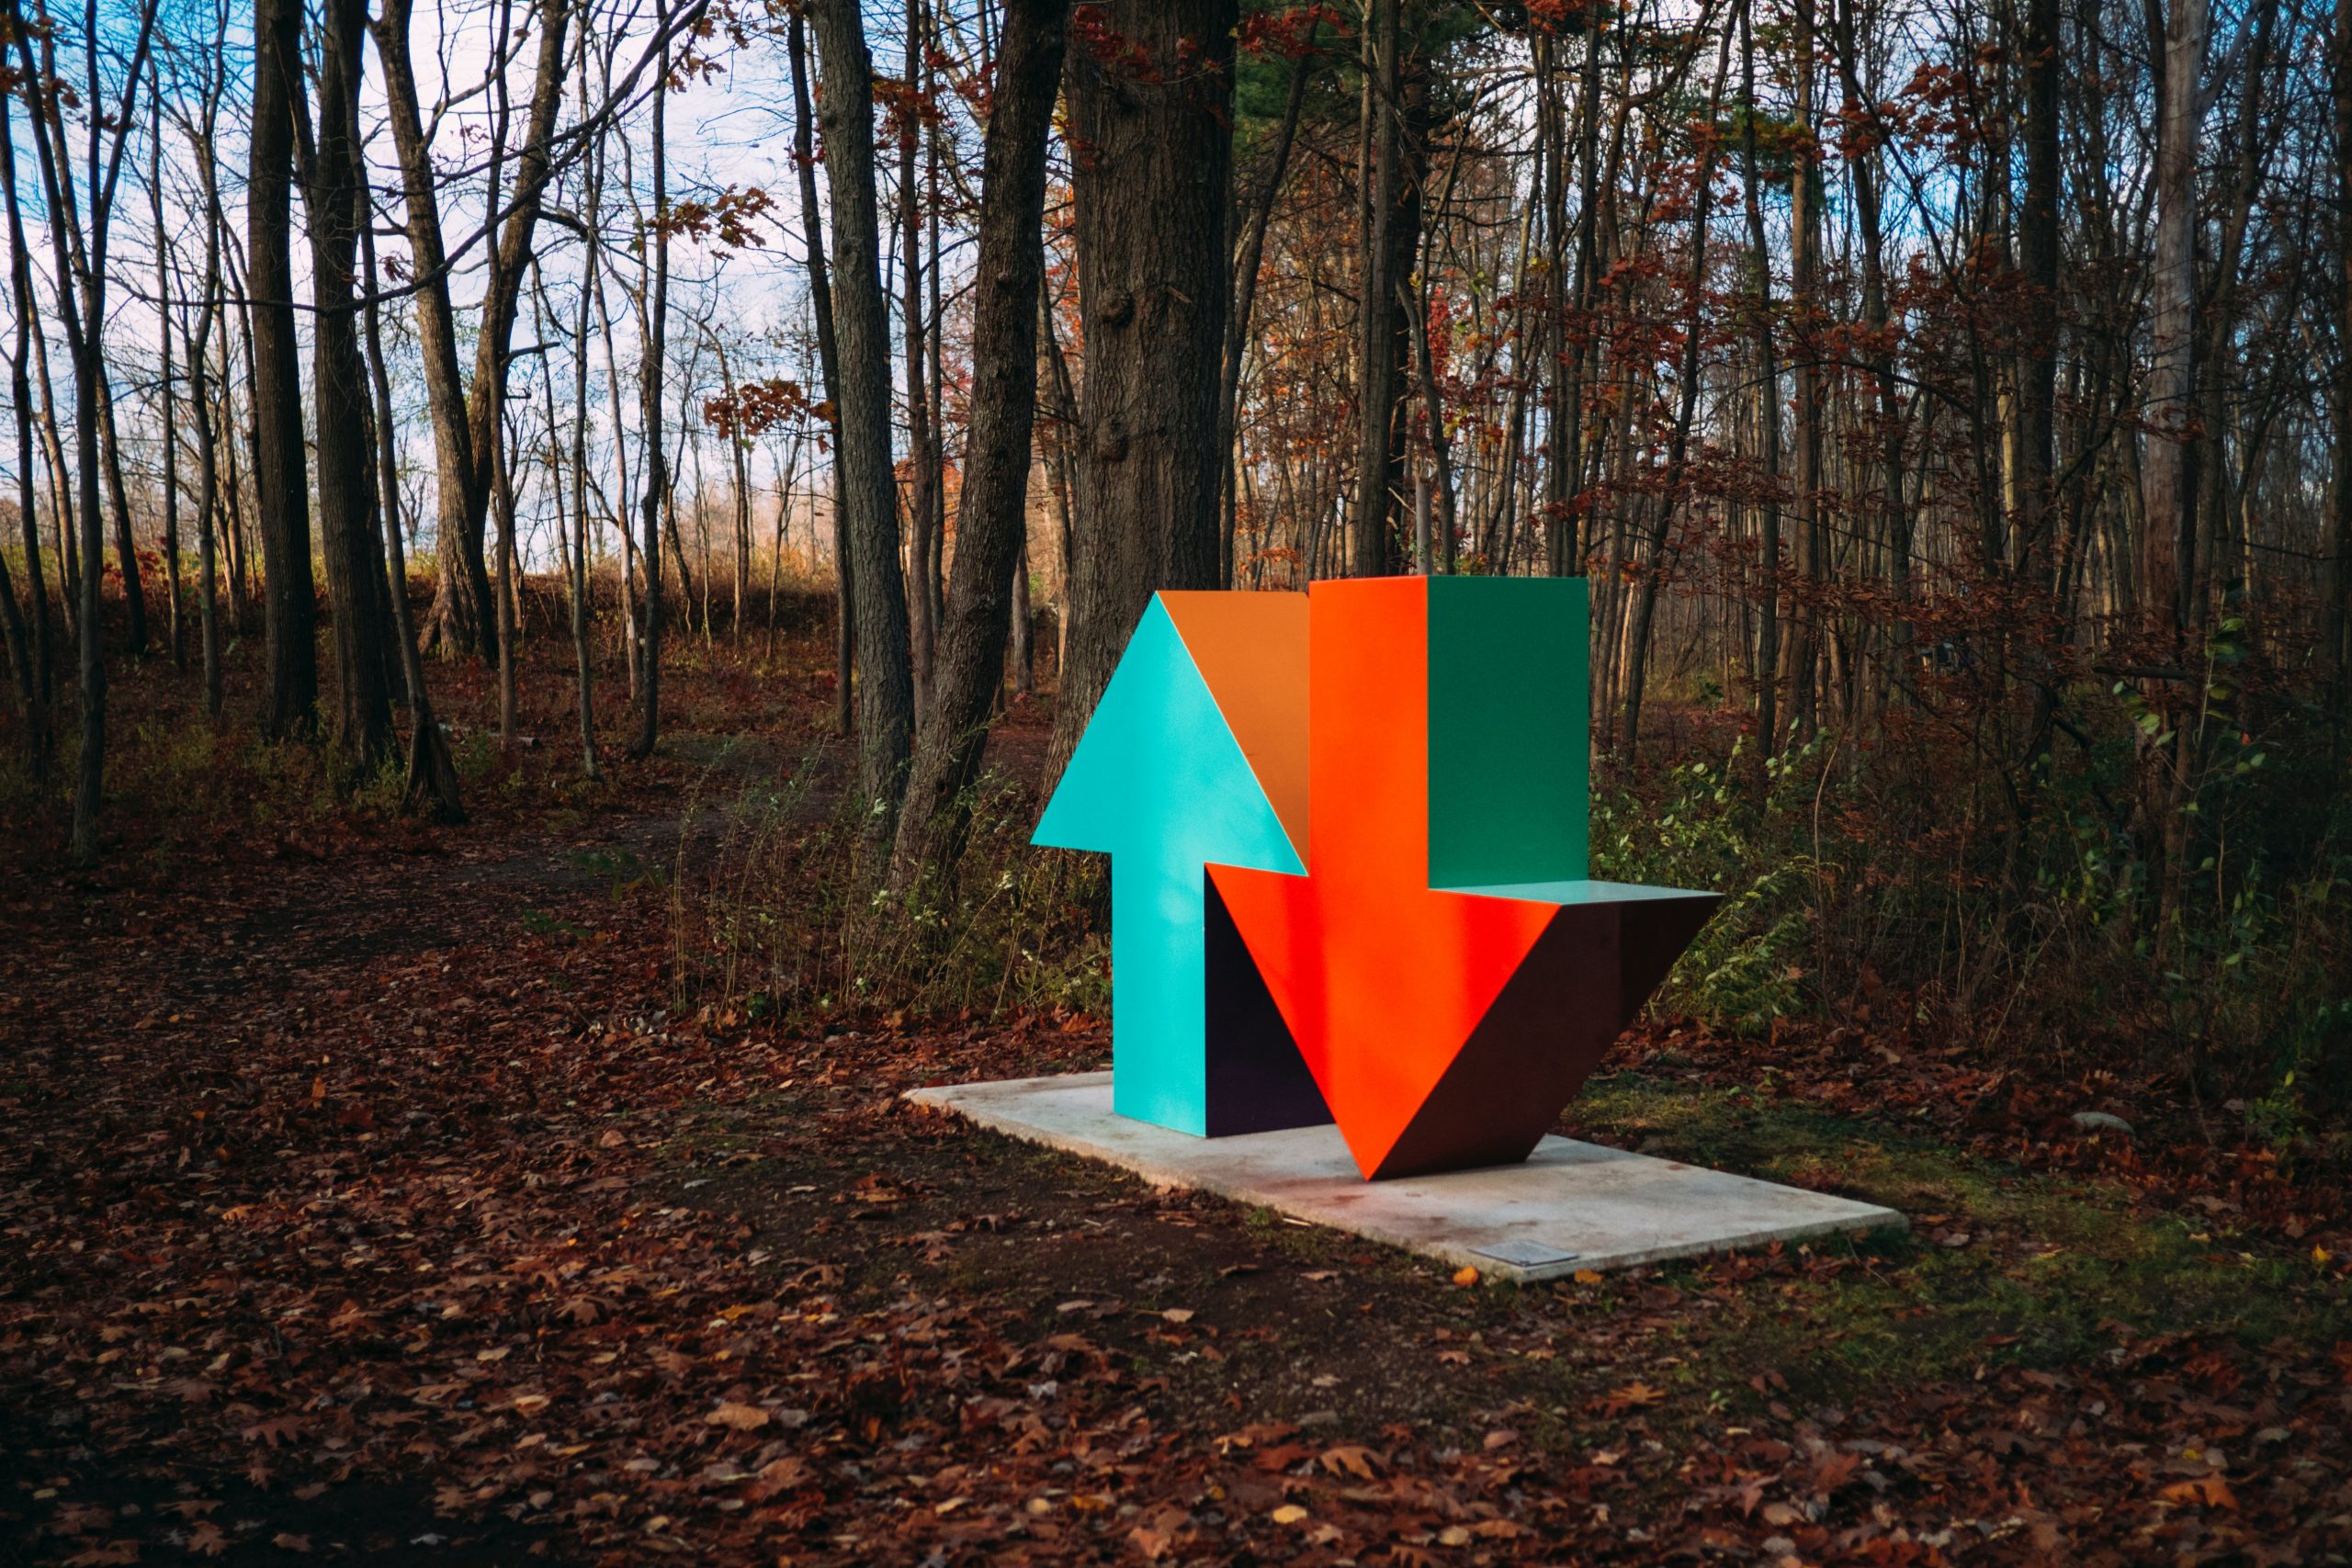 Neon blue and red arrow sculpture in the woods